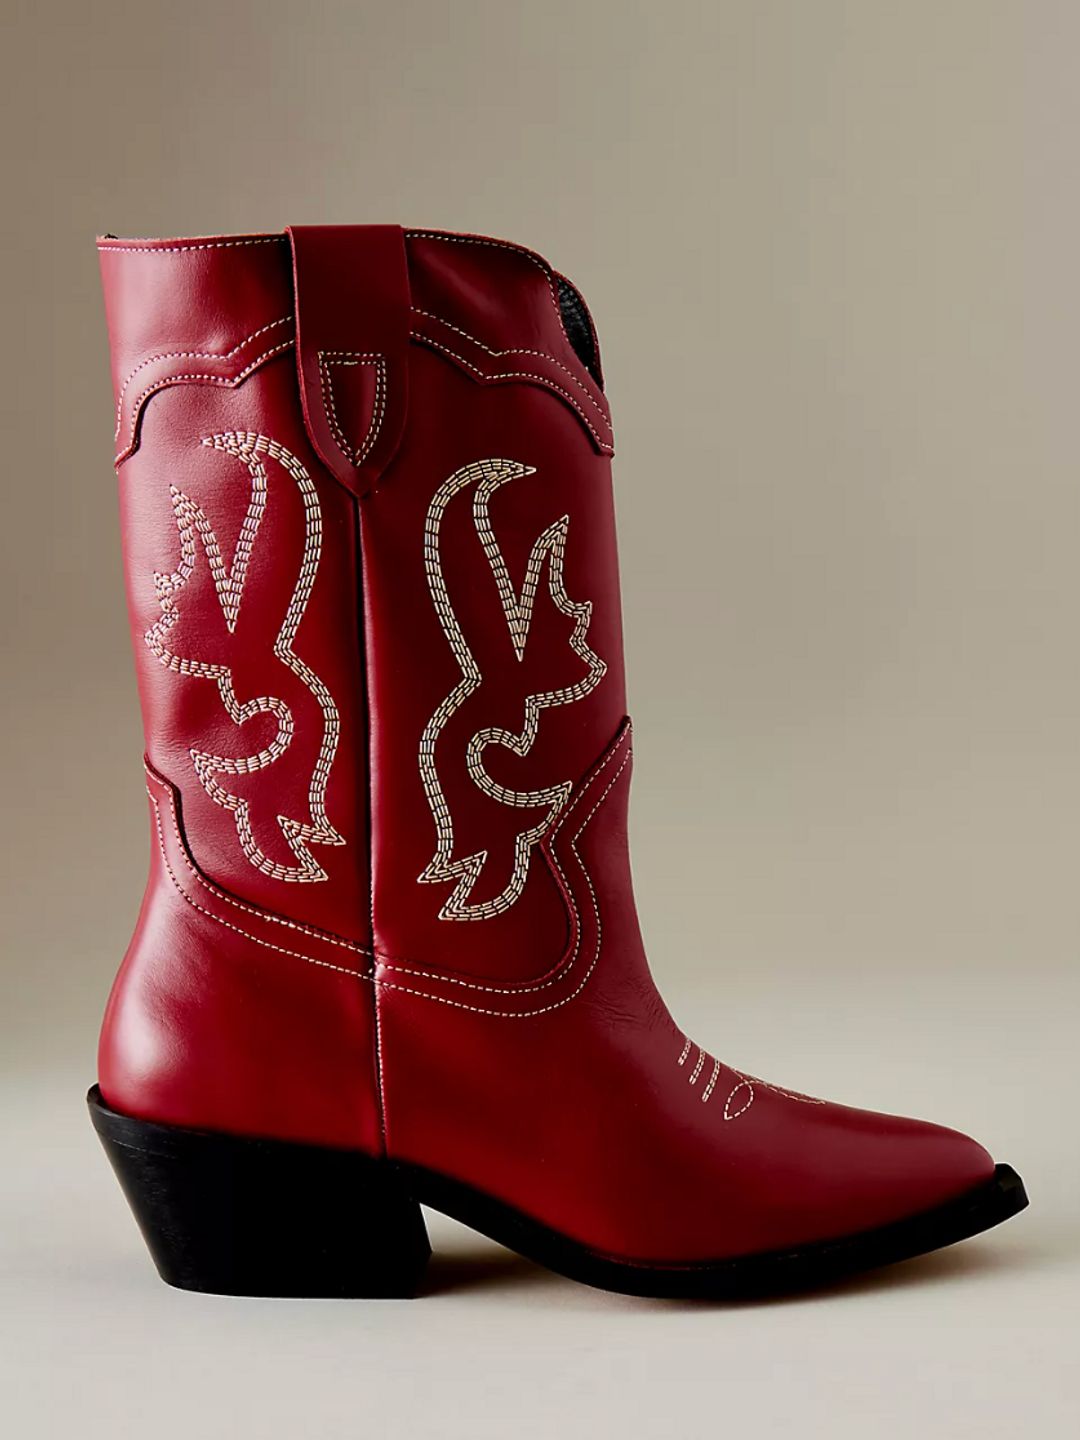 Fall Favorites Re-imagined  Womens cowgirl boots, Red cowboy boots, Cowboy  boots women